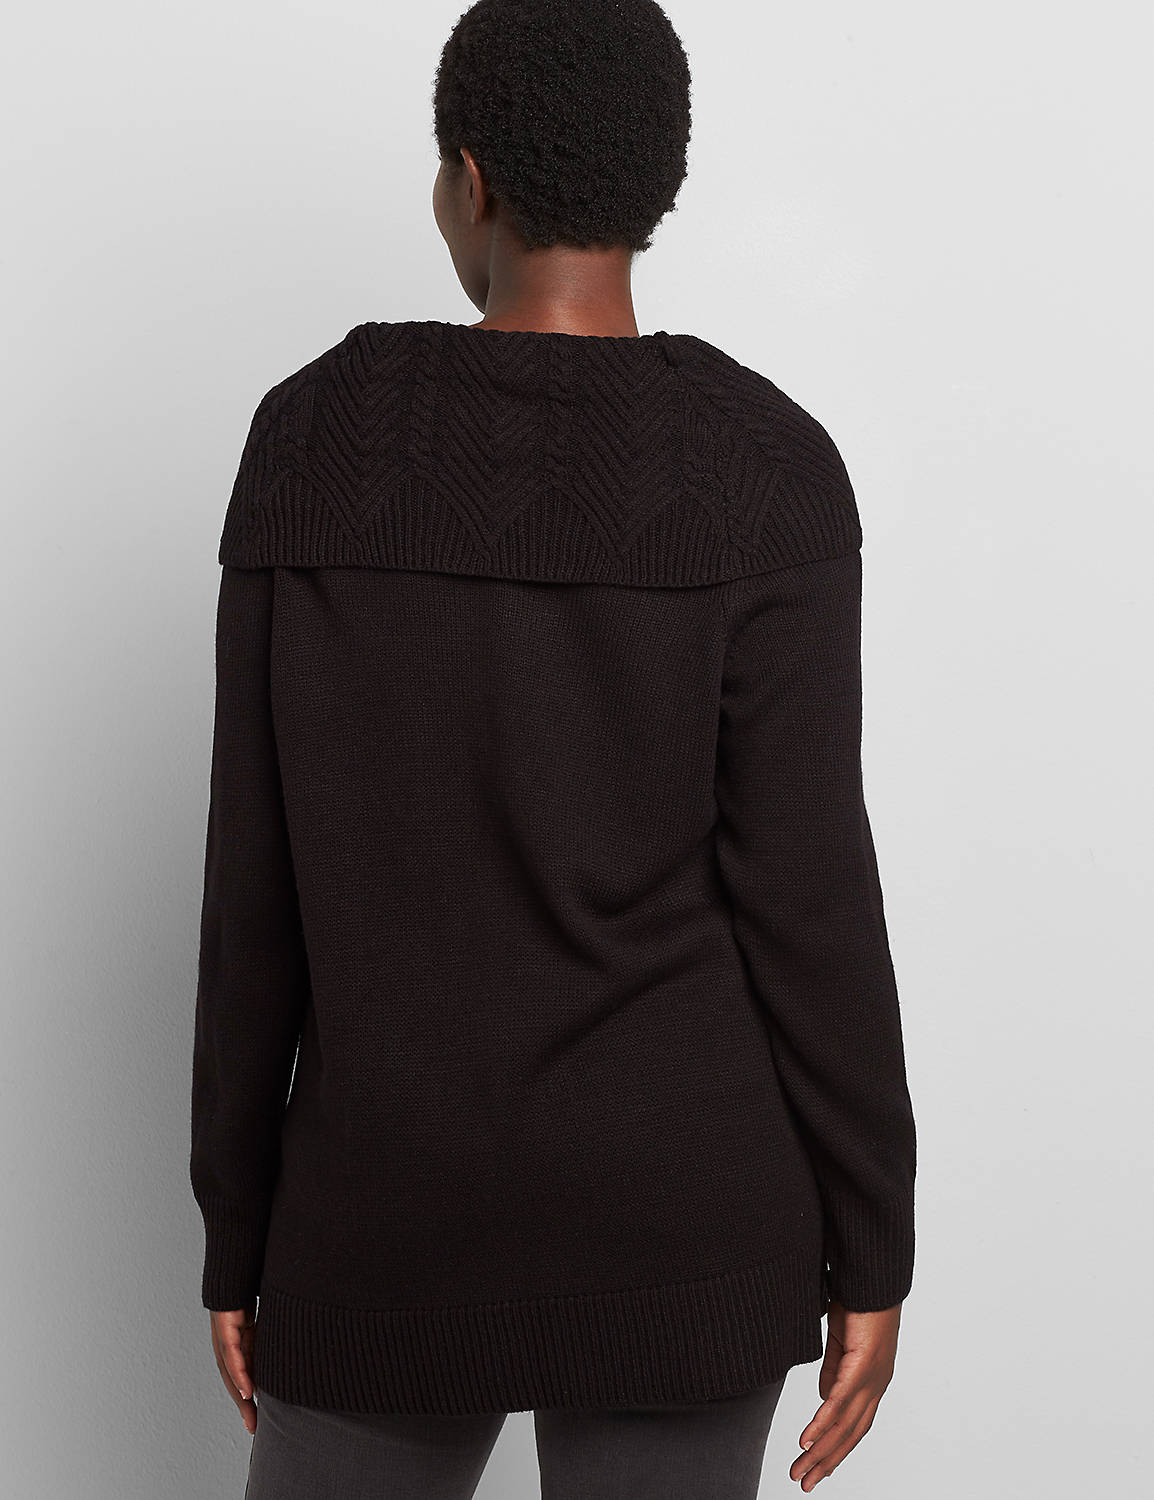 OUTLET LONG SLEEVE COWL POINTELLE TUNIC SWEATER 1113638:Pitch Black LB 1000322:14/16 Product Image 2